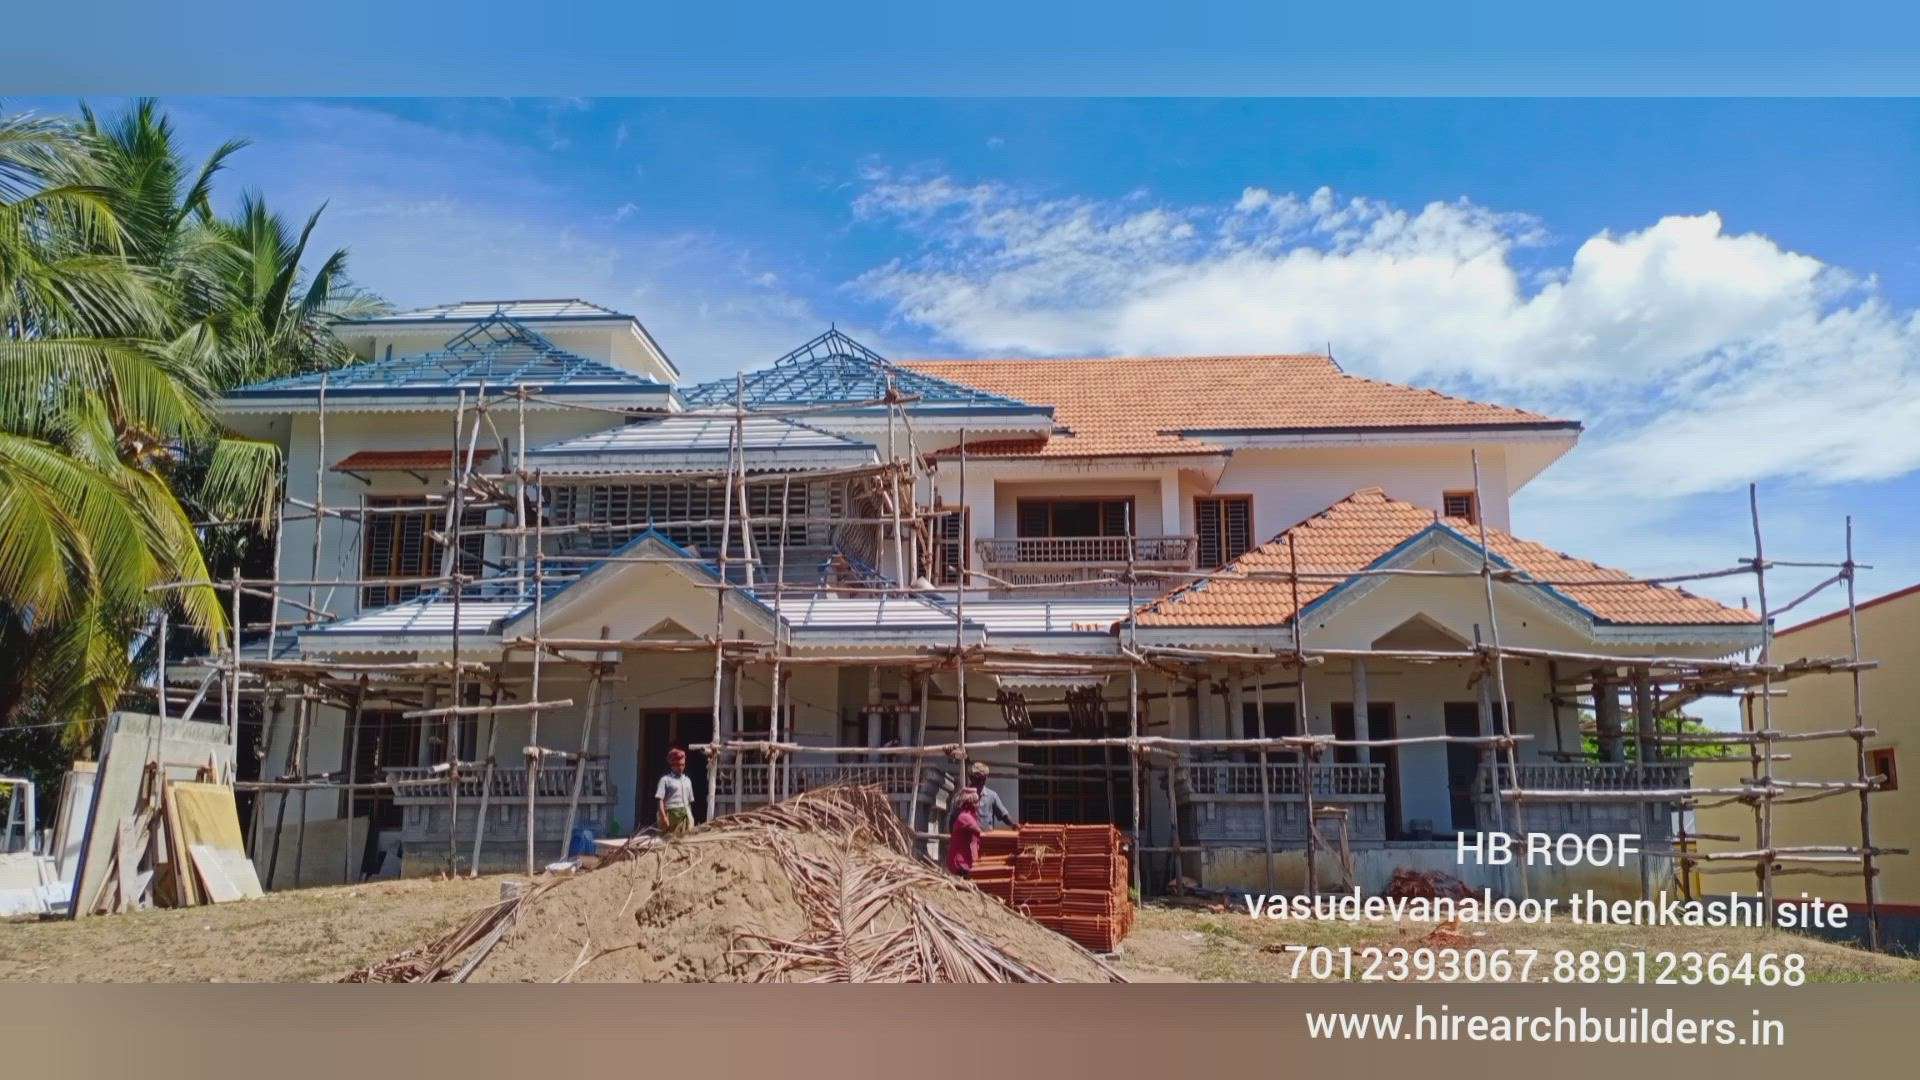 clay tile roof 
7012393067
www.hirearchbuilders.in